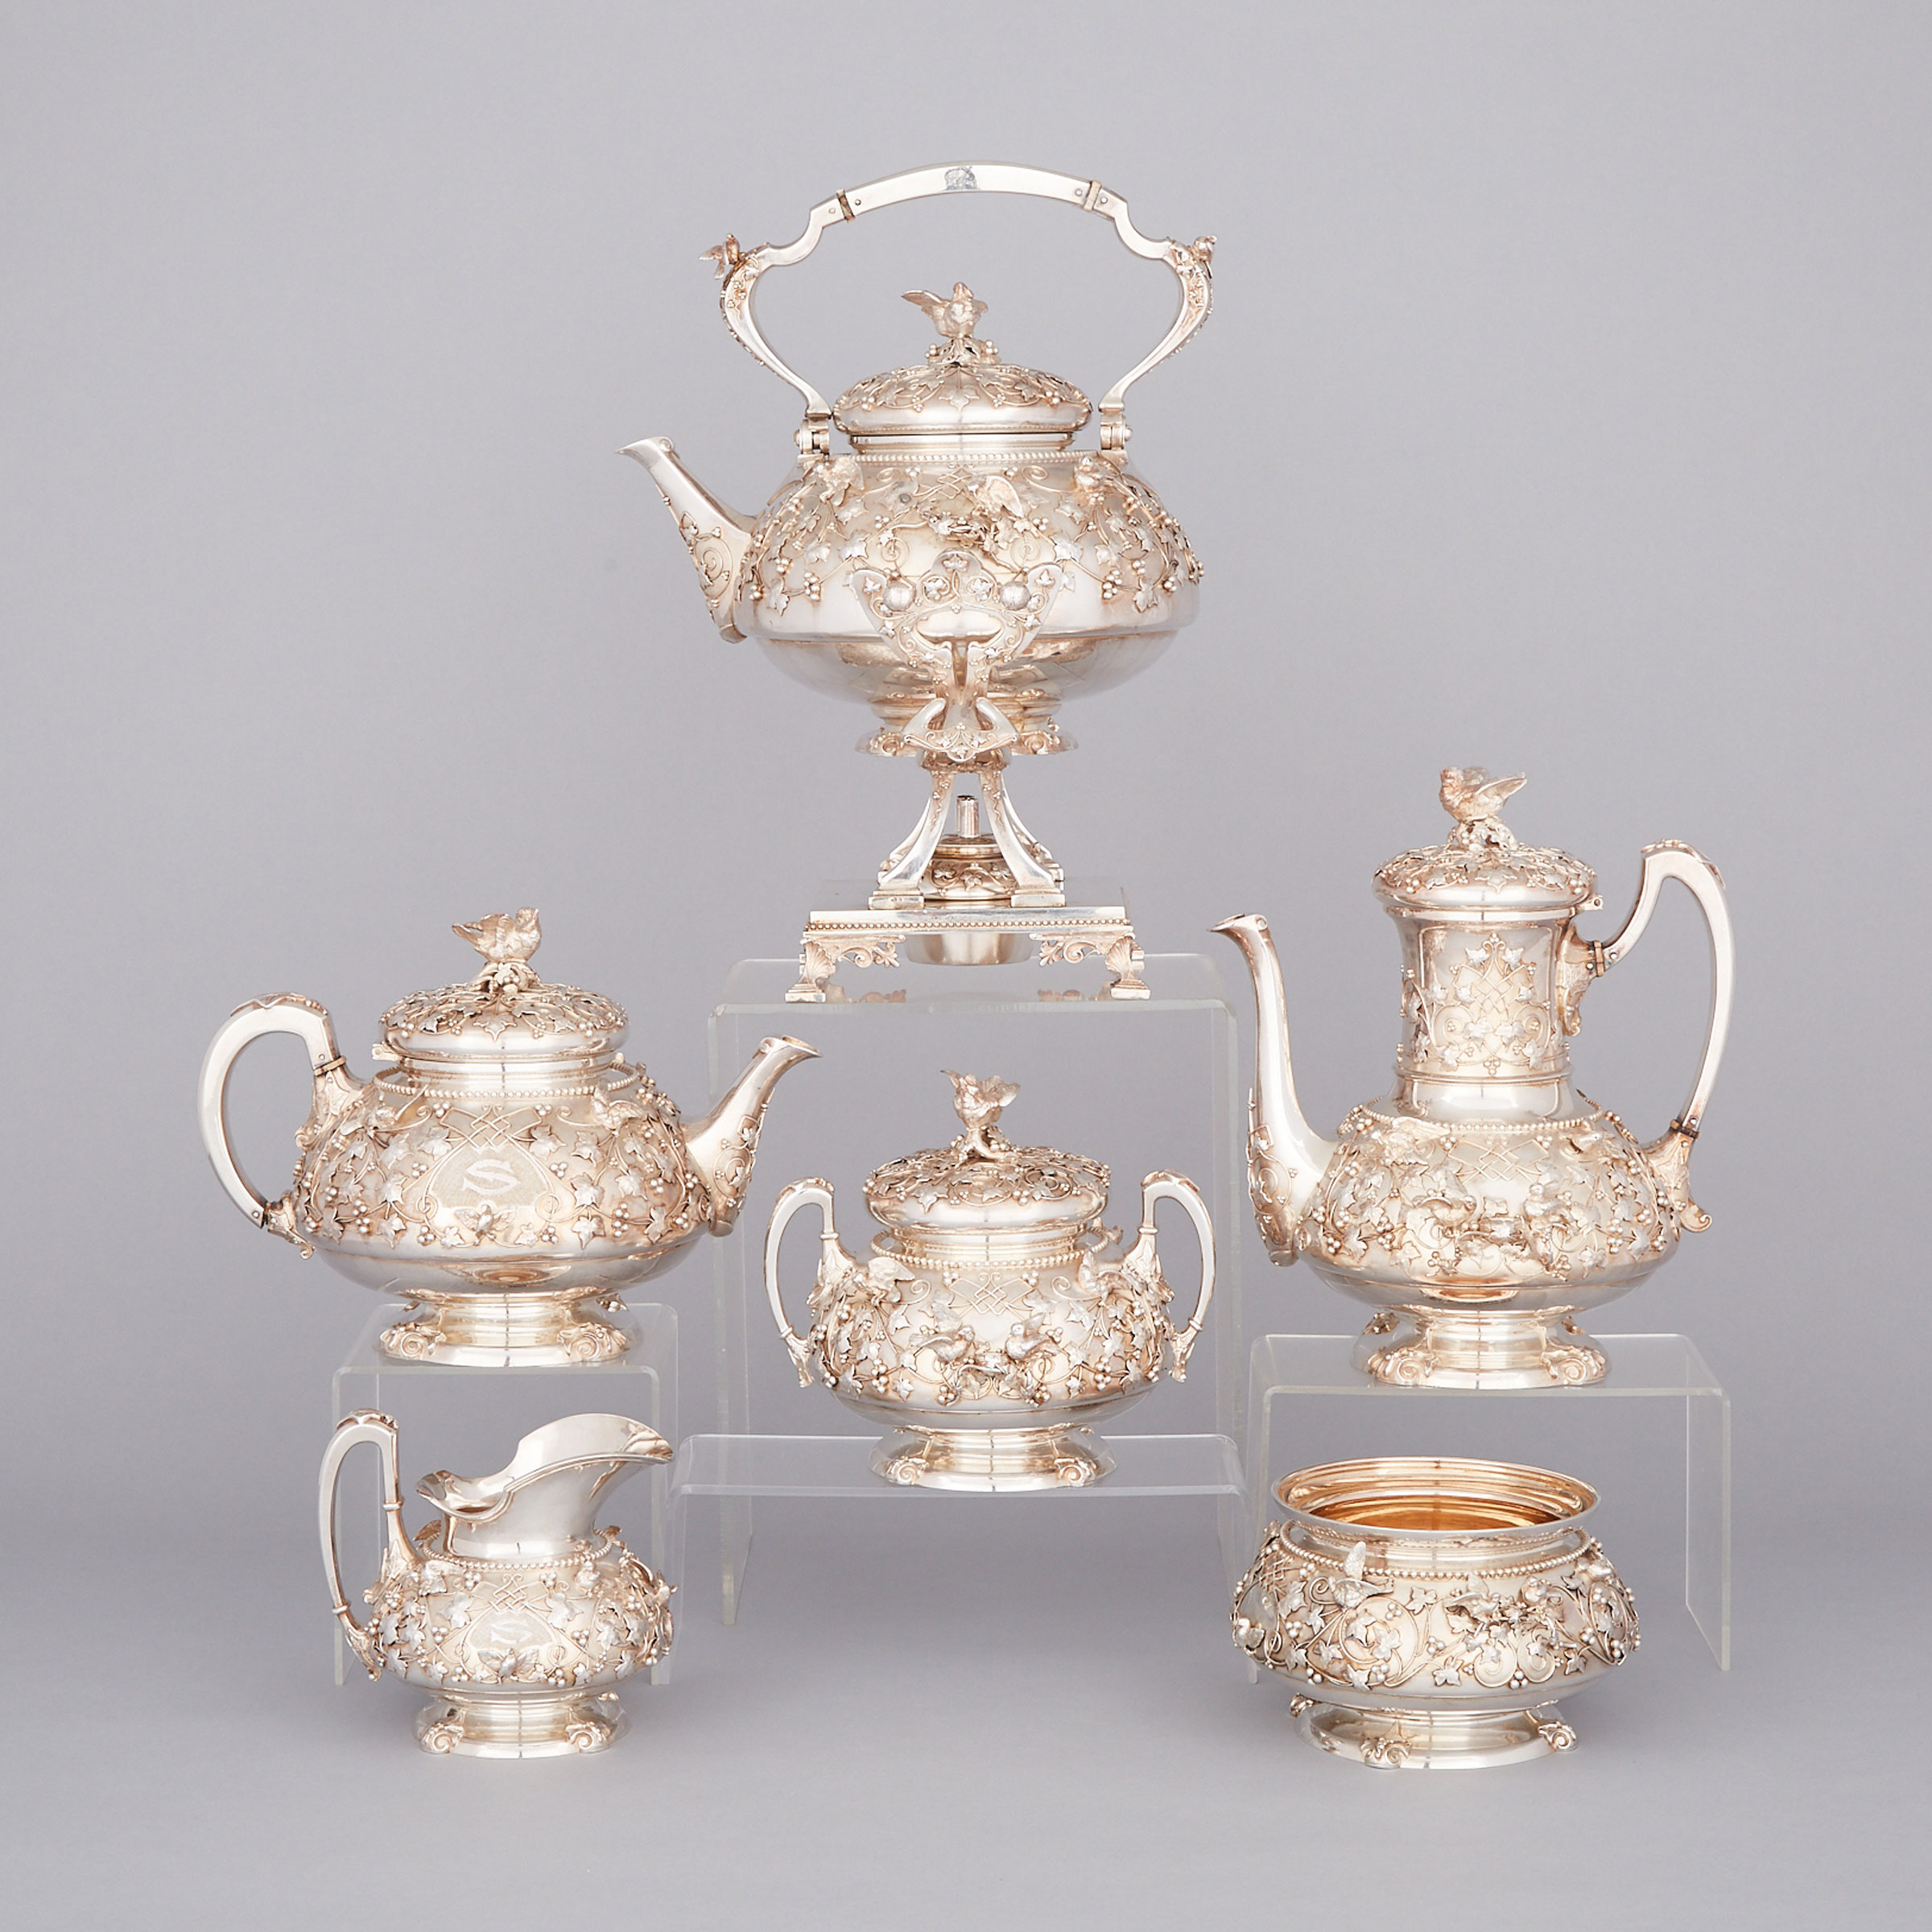 American Silver ‘Bird’s Nest’ Pattern Tea and Coffee Service, attributed to Tiffany & Co., c.1875